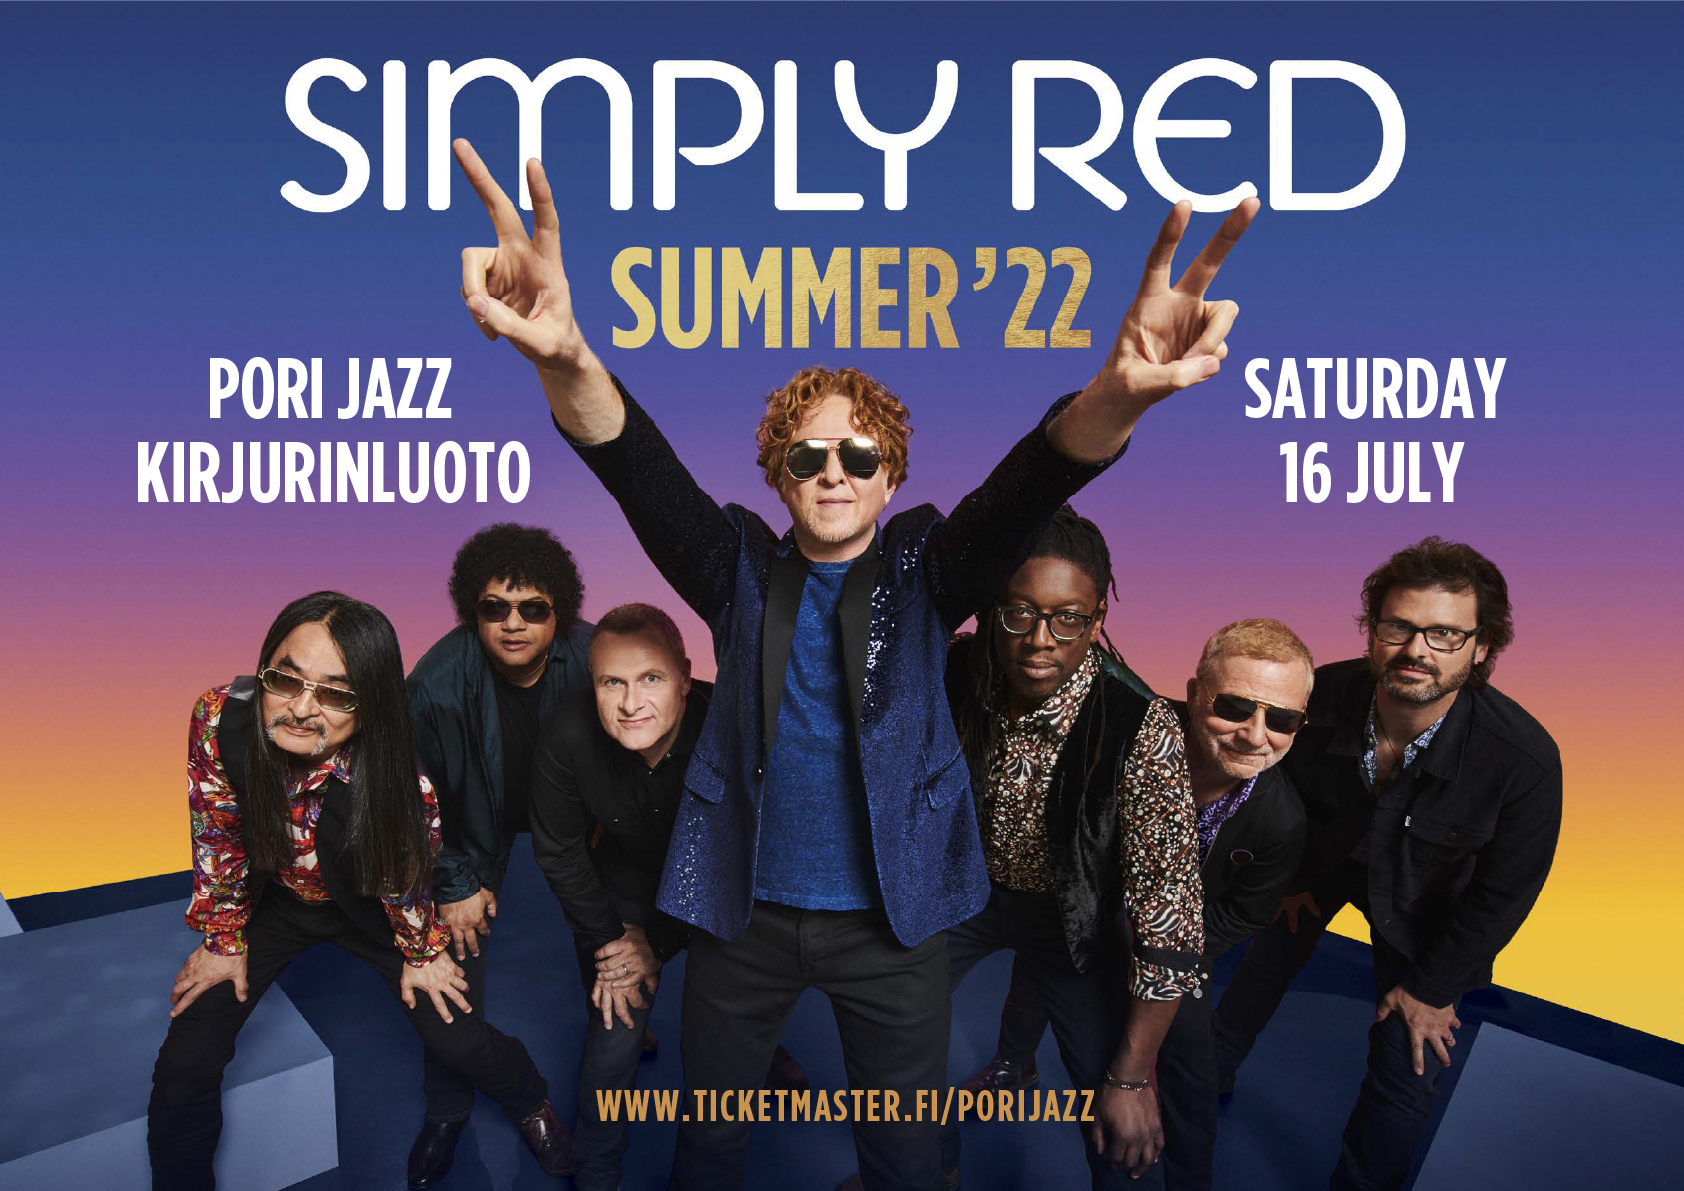 Simply Red on Twitter: "Simply Red will perform at the Pori Jazz Festival in Kirjurinluoto, Pori, Finland on 16th 2022. Tickets are already on sale here: https://t.co/ttL1z0HJHp https://t.co/1EmjpZS2sS" / Twitter